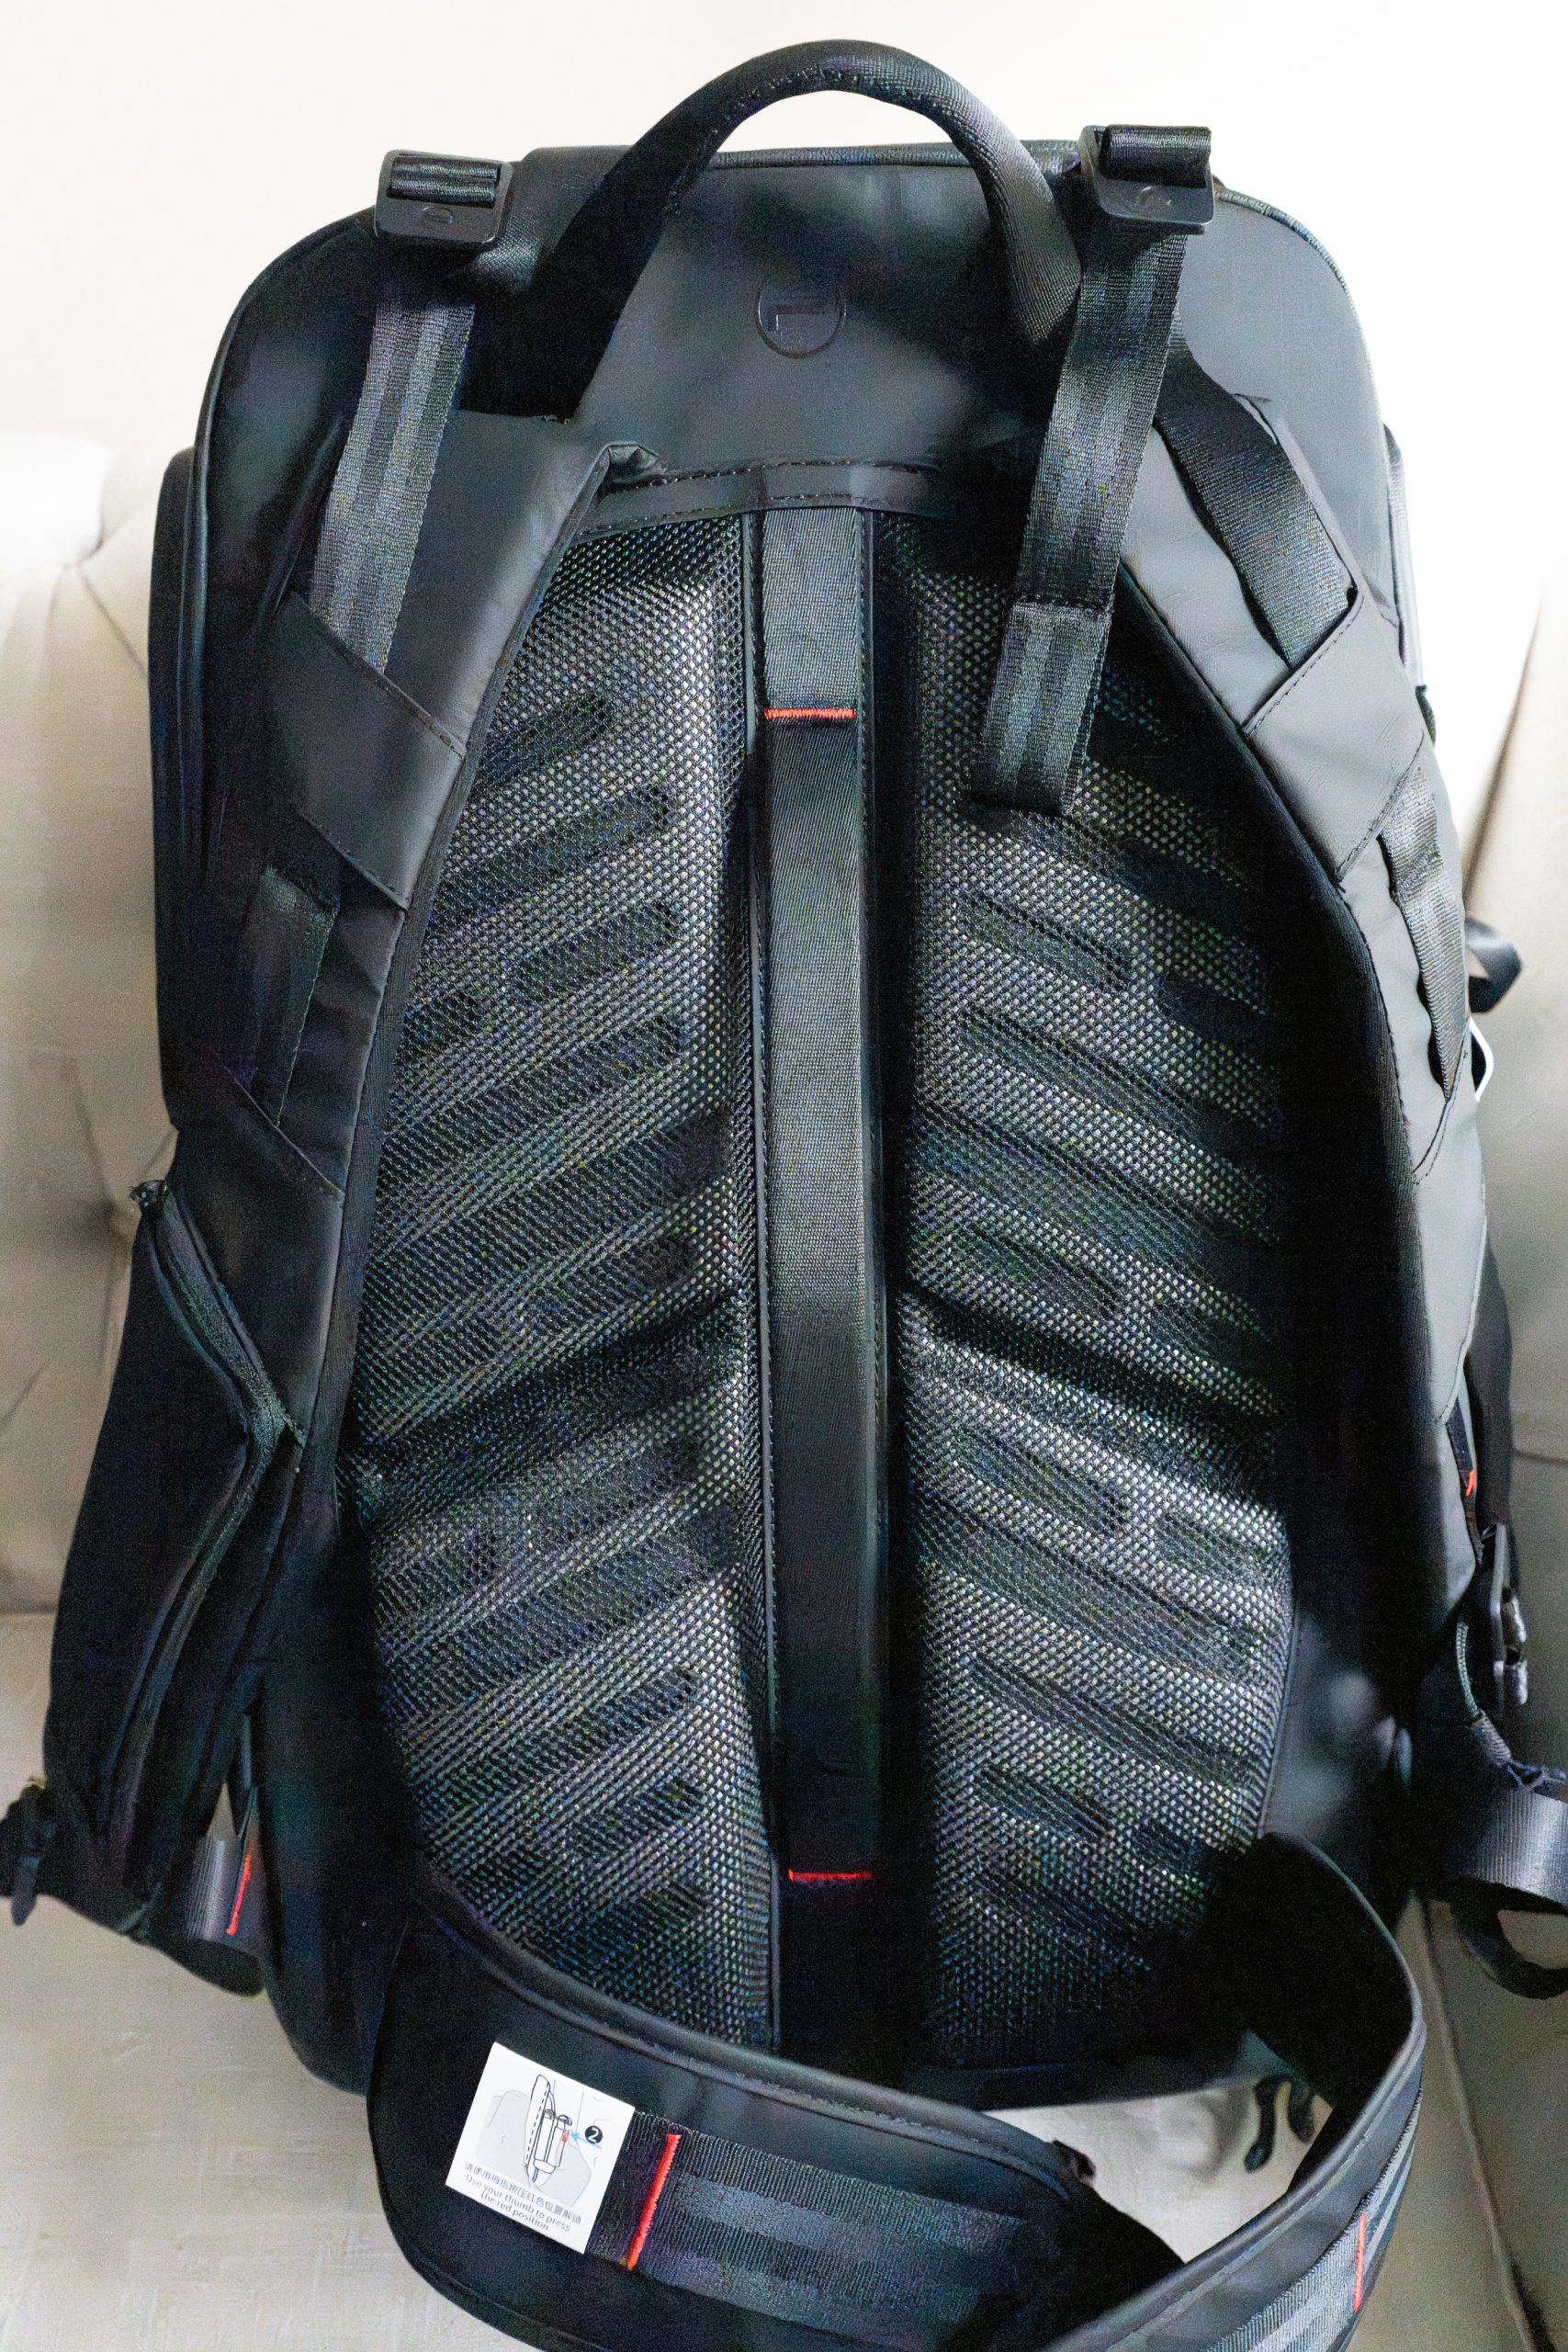 PGYTECH OneMo 2: this might be your ultimate backpack